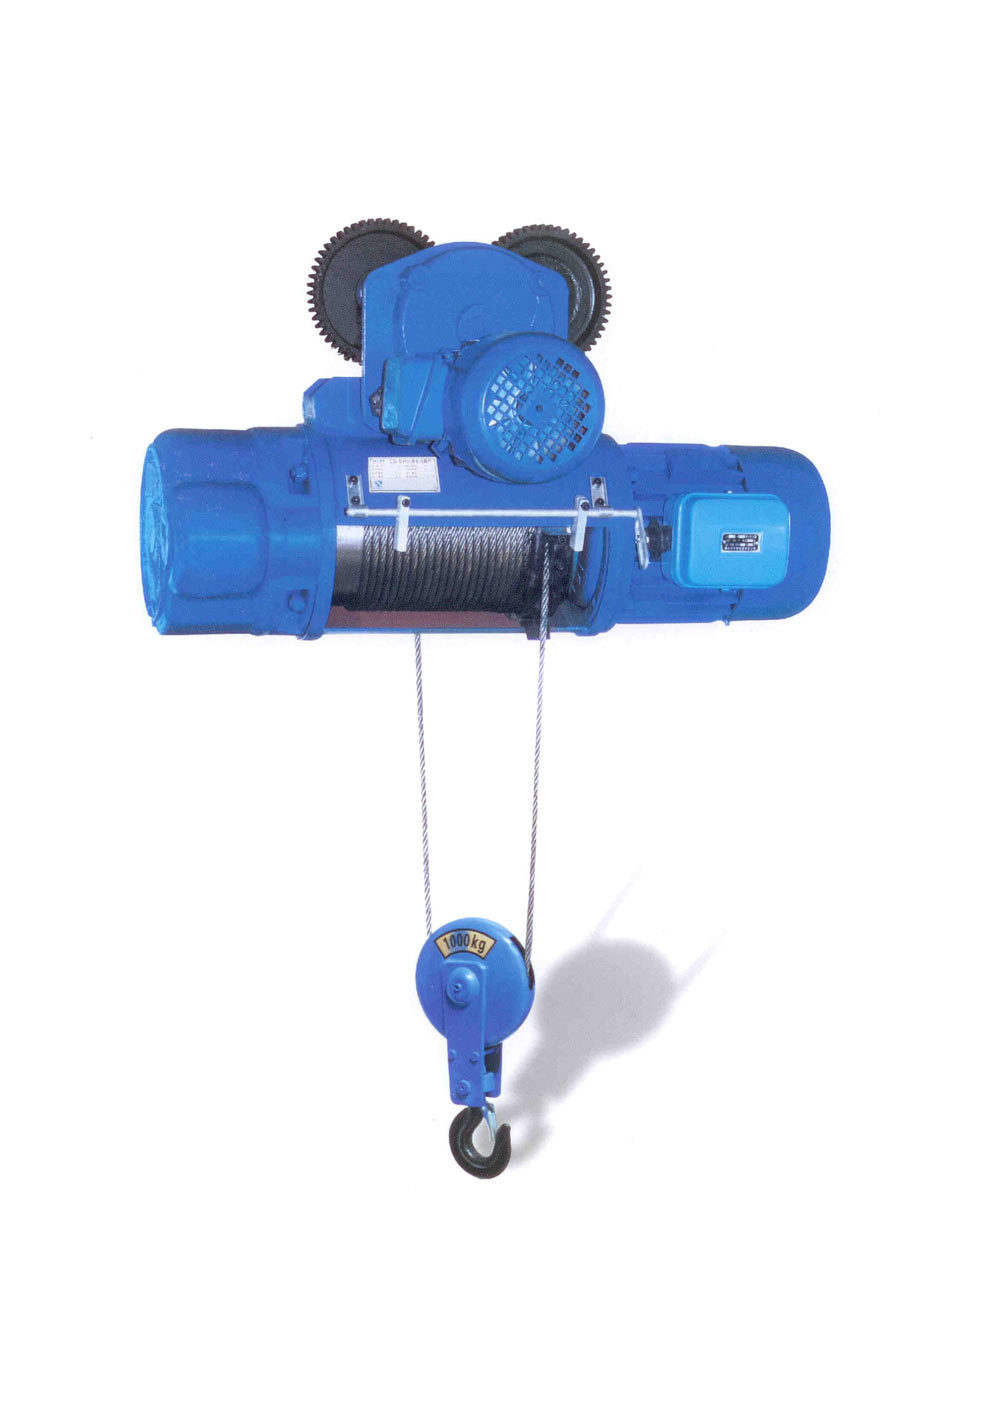 China Supplier of wire rope electric hoist.jpg